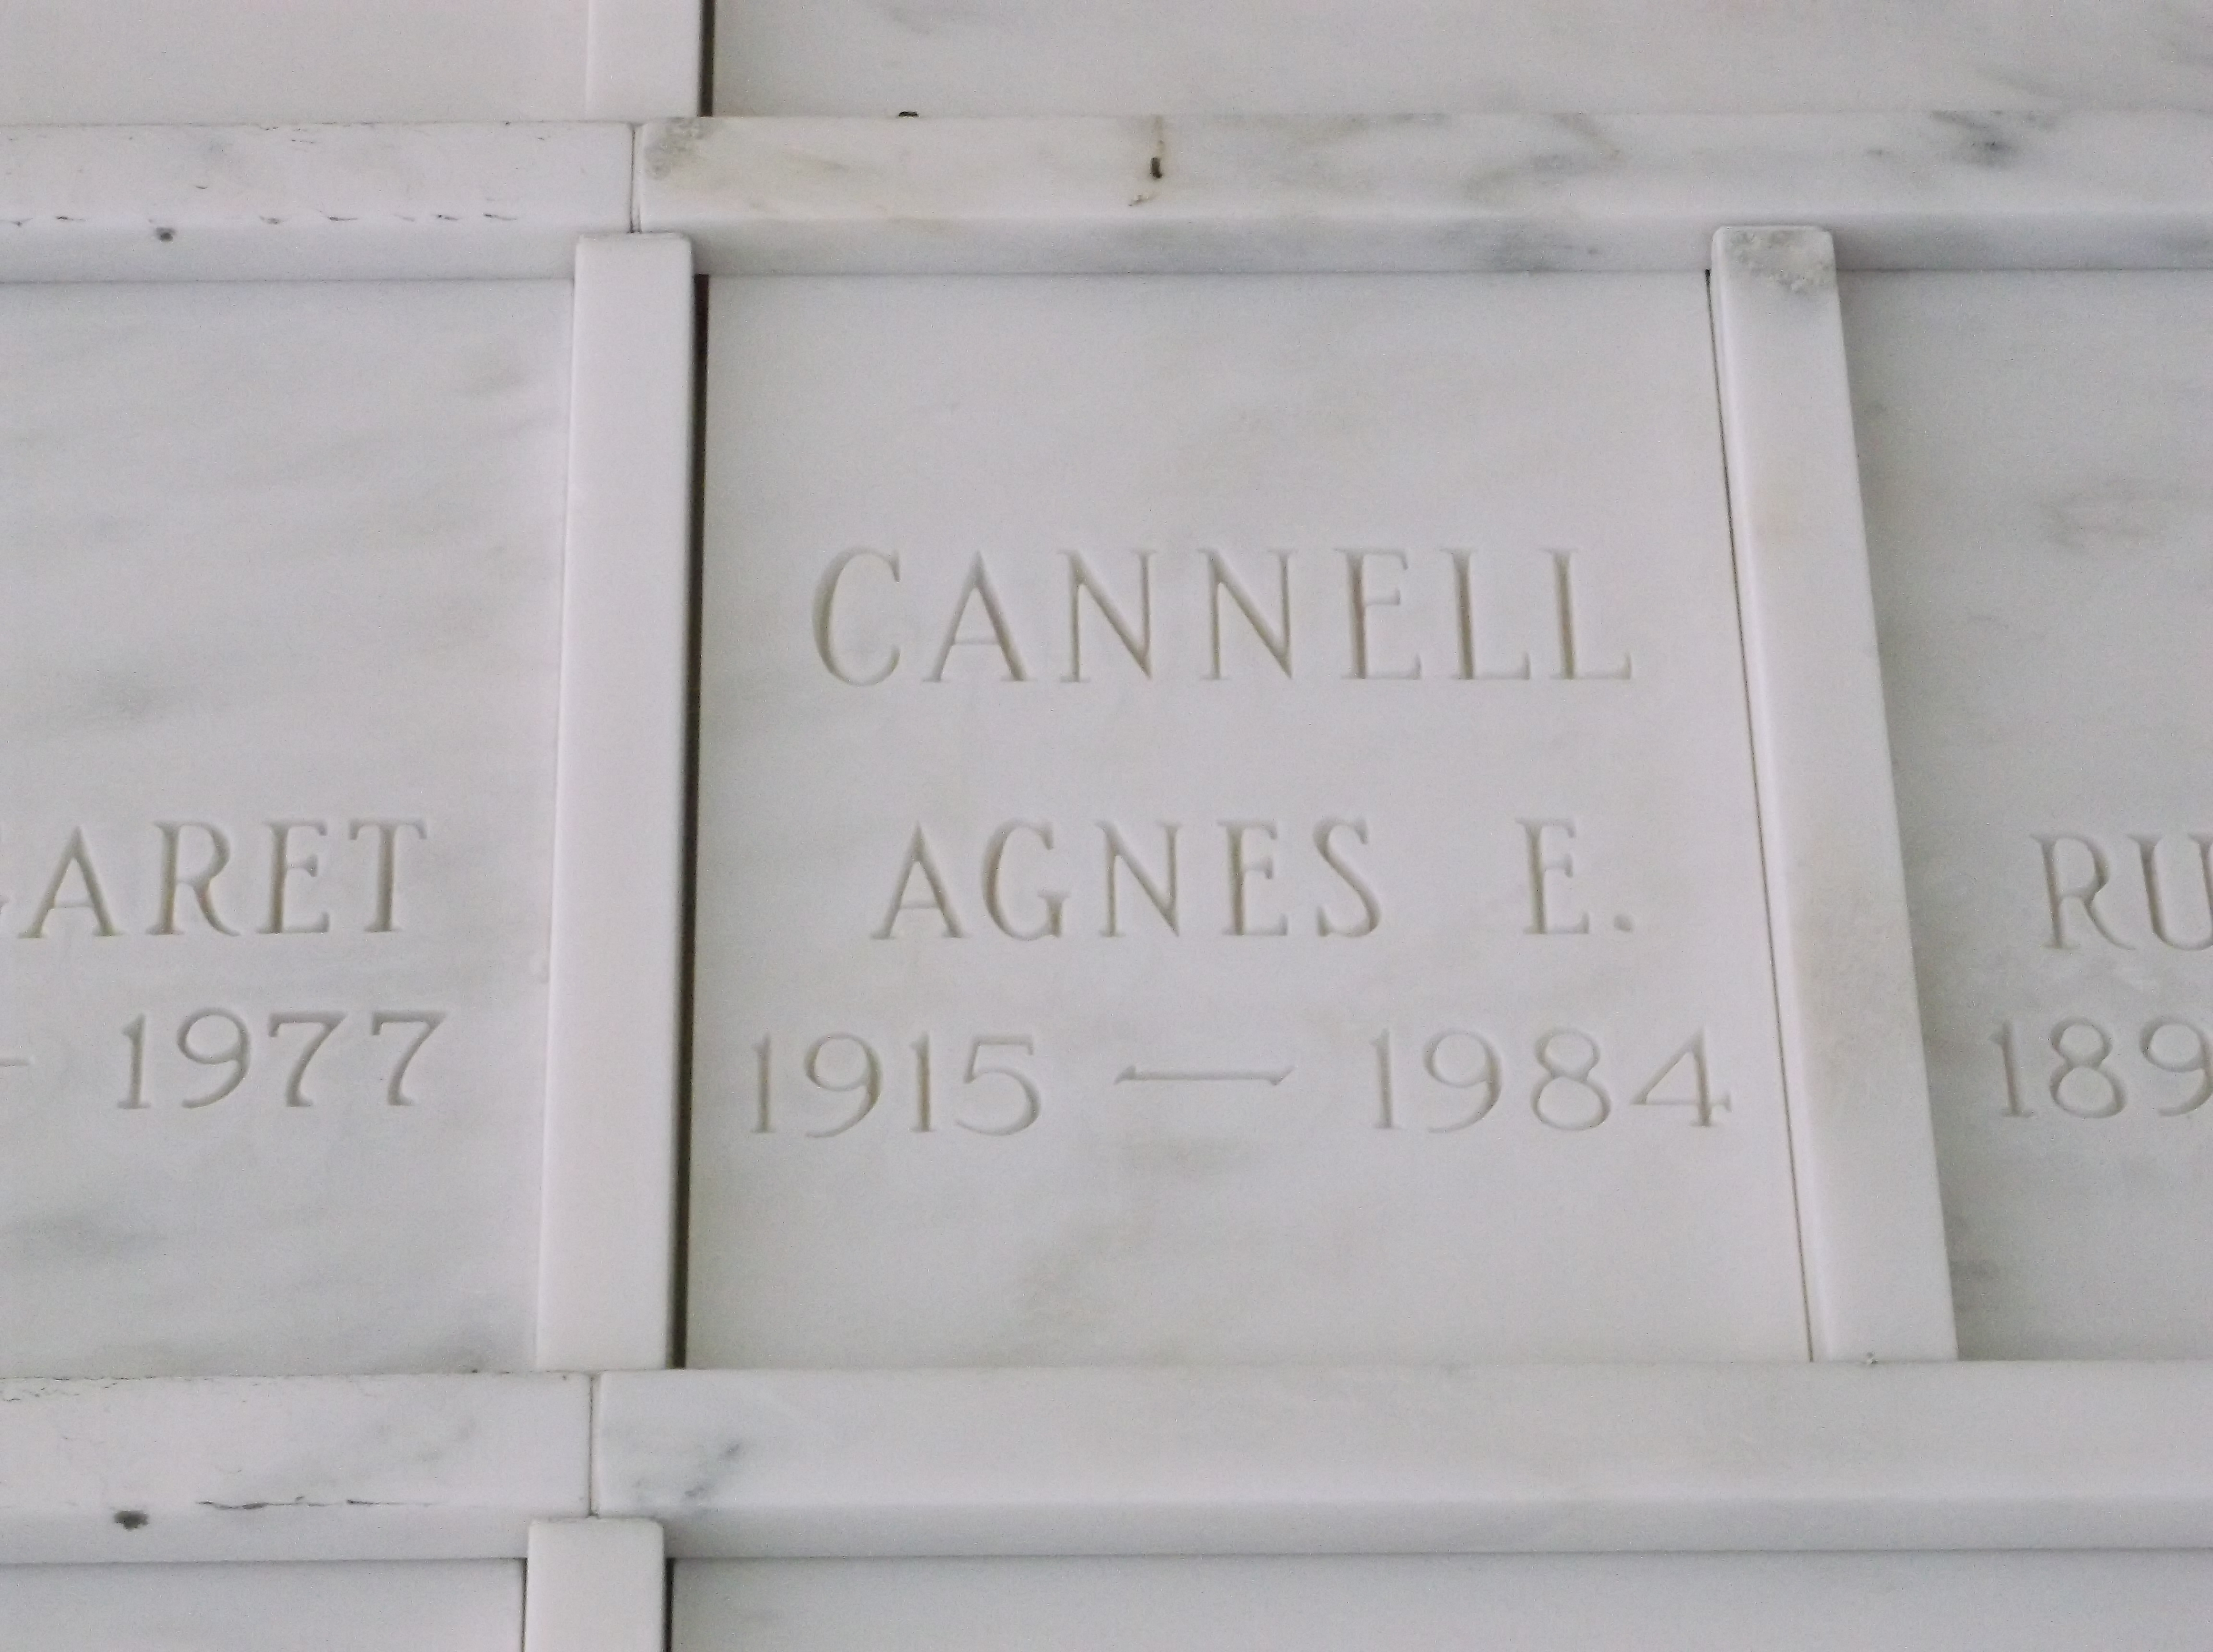 Agnes E Cannell